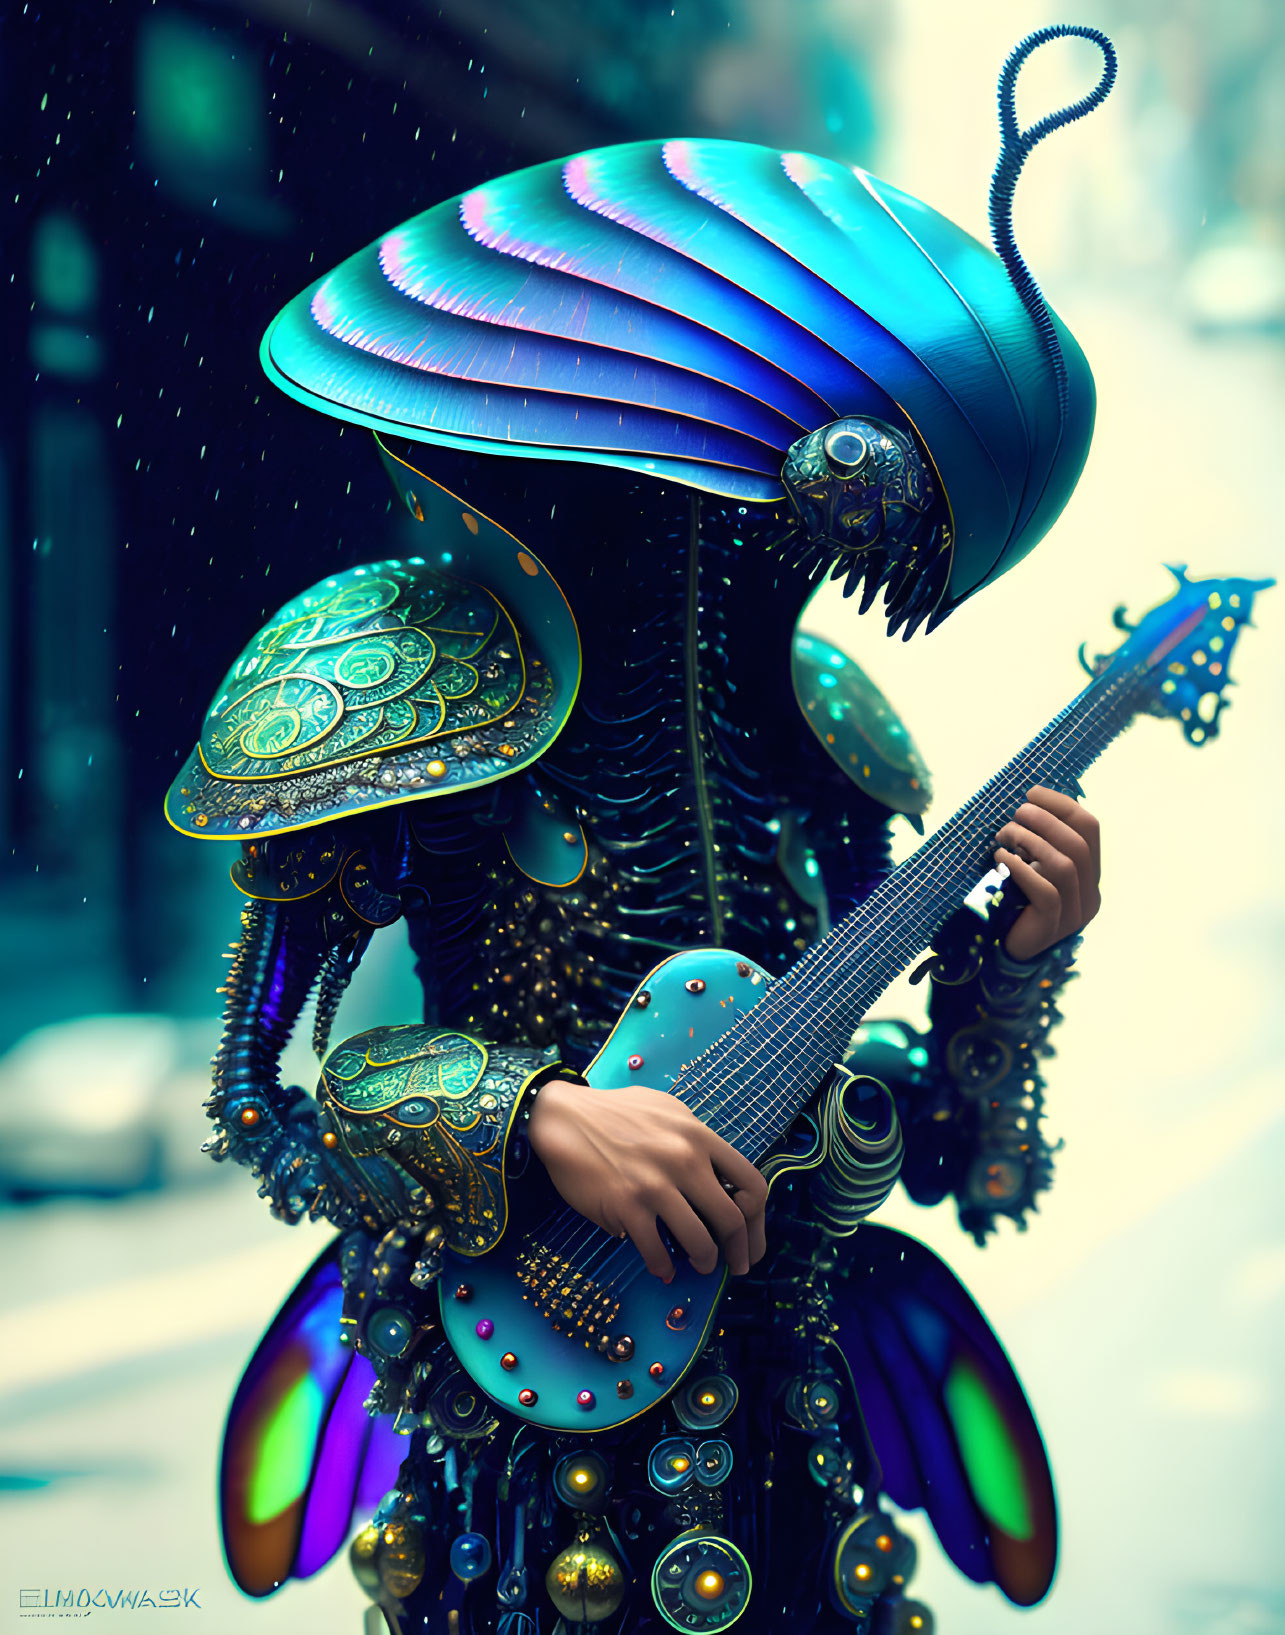 Insectoid Street performer